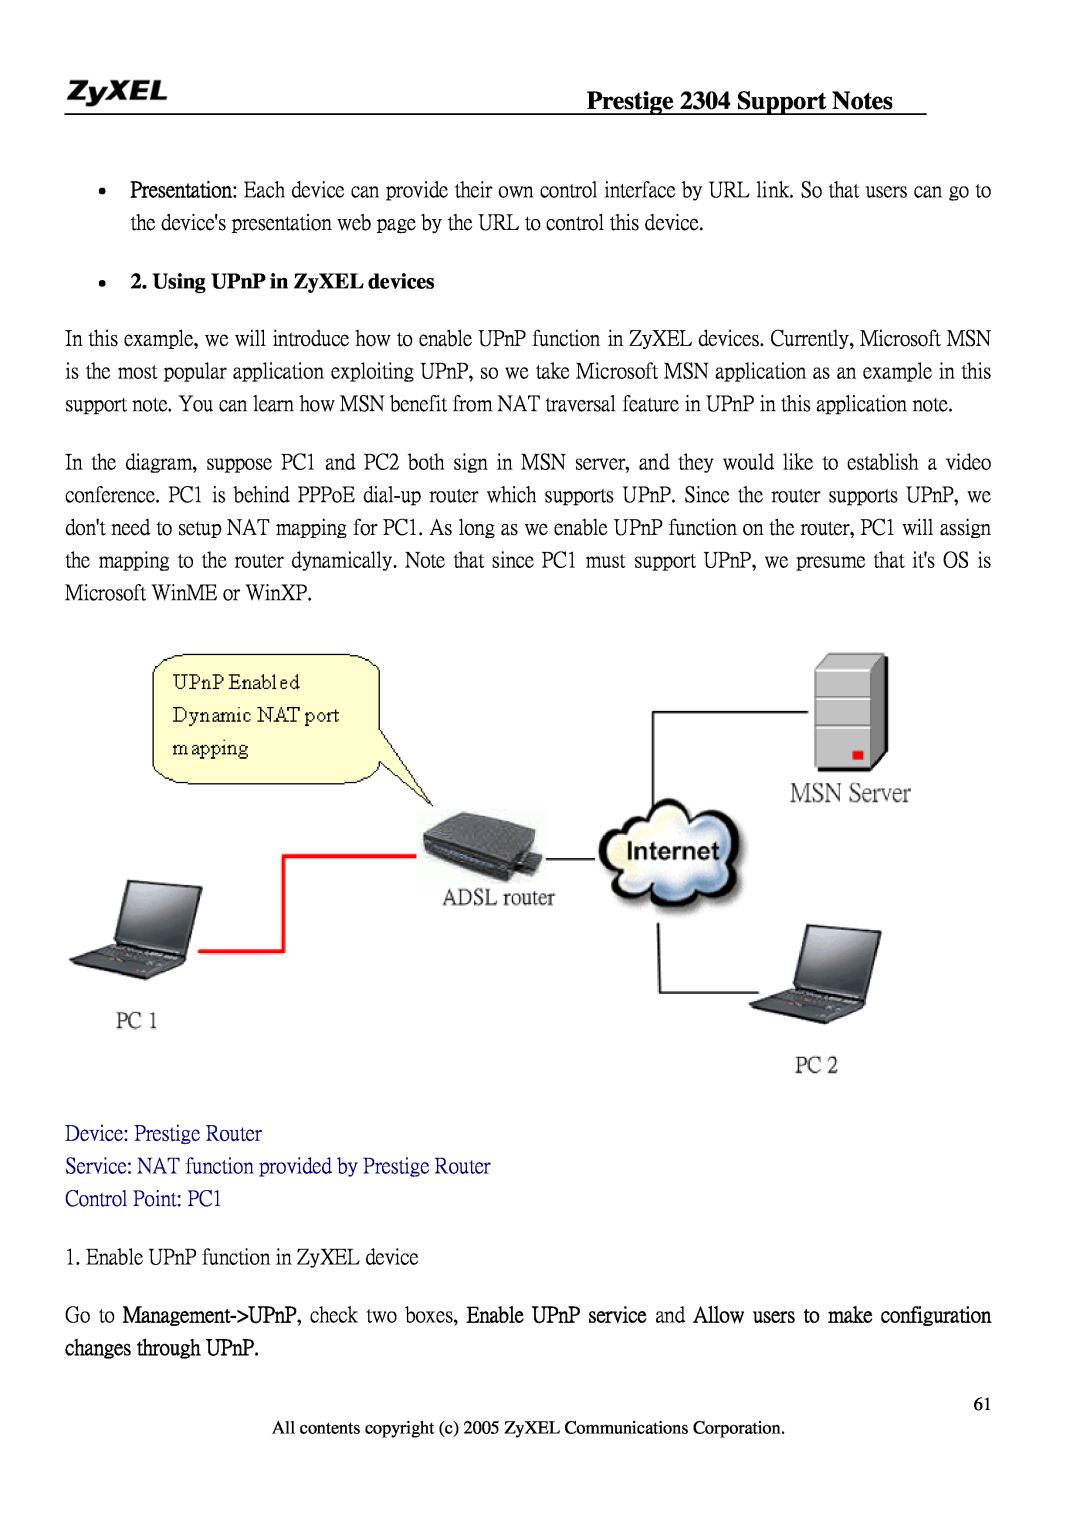 ZyXEL Communications 2304R-P1 manual Using UPnP in ZyXEL devices, Prestige 2304 Support Notes, Device Prestige Router 